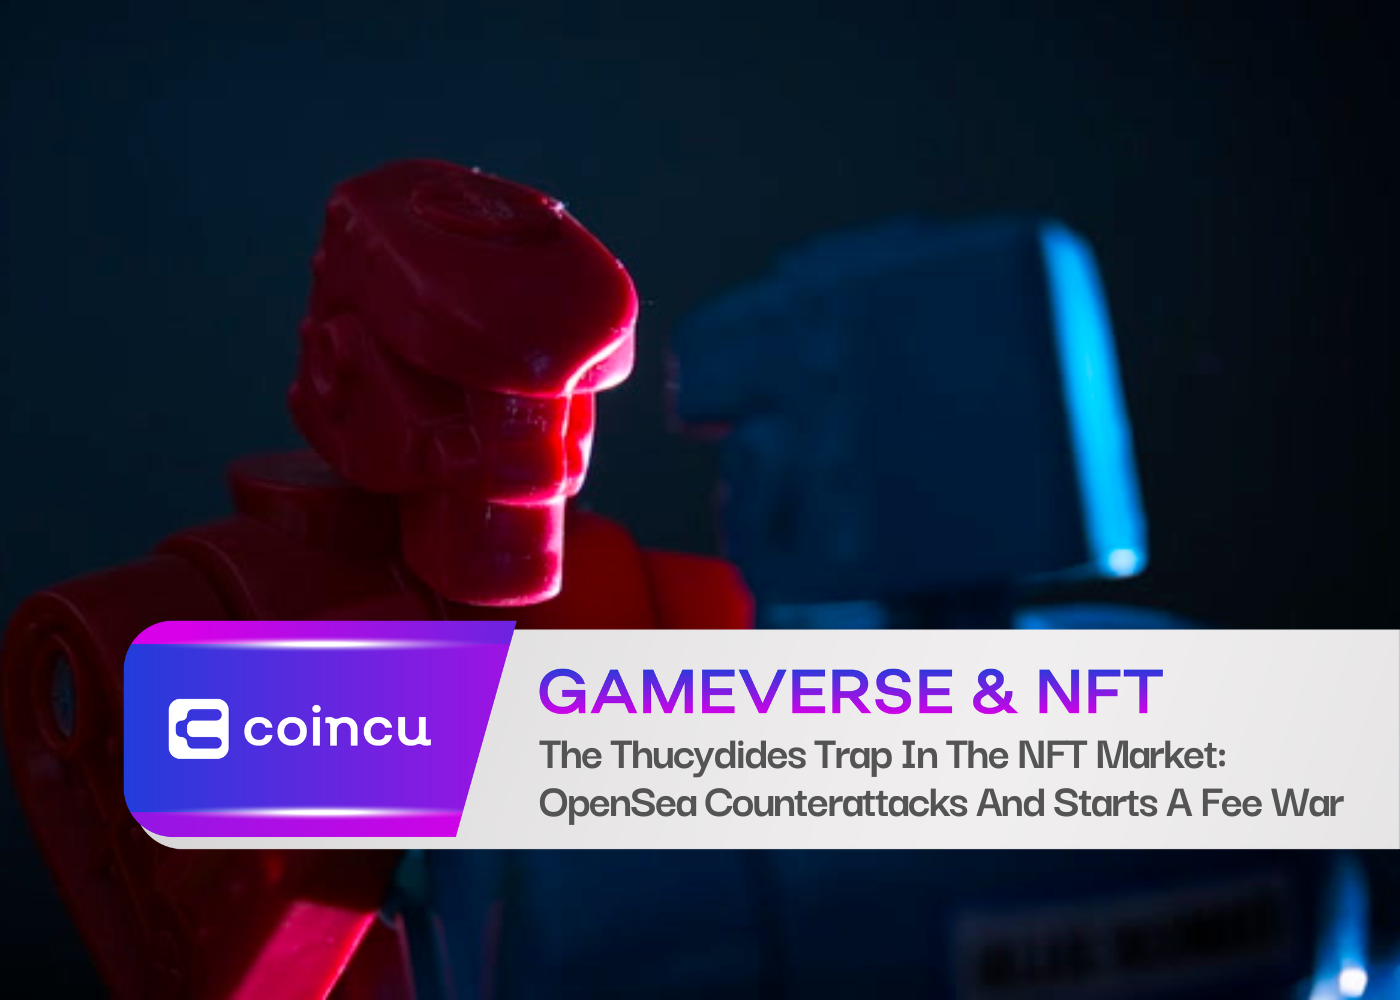 The Thucydides Trap In The NFT Market: OpenSea Counterattacks And Starts A Fee War